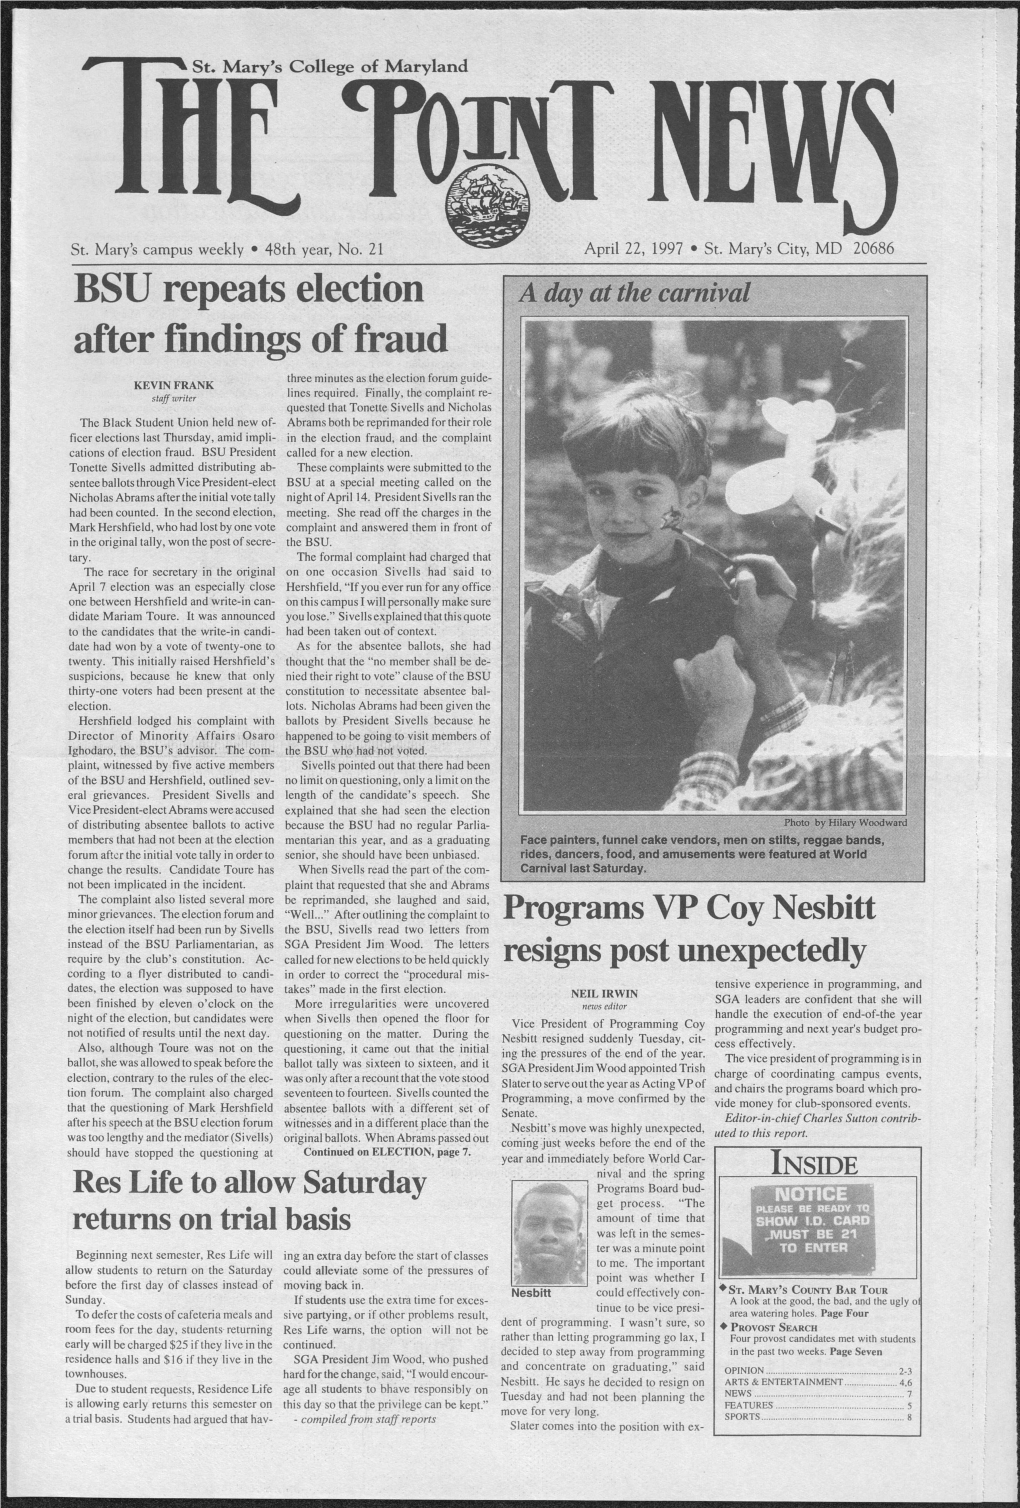 BSU Repeats Election After Findings of Fraud